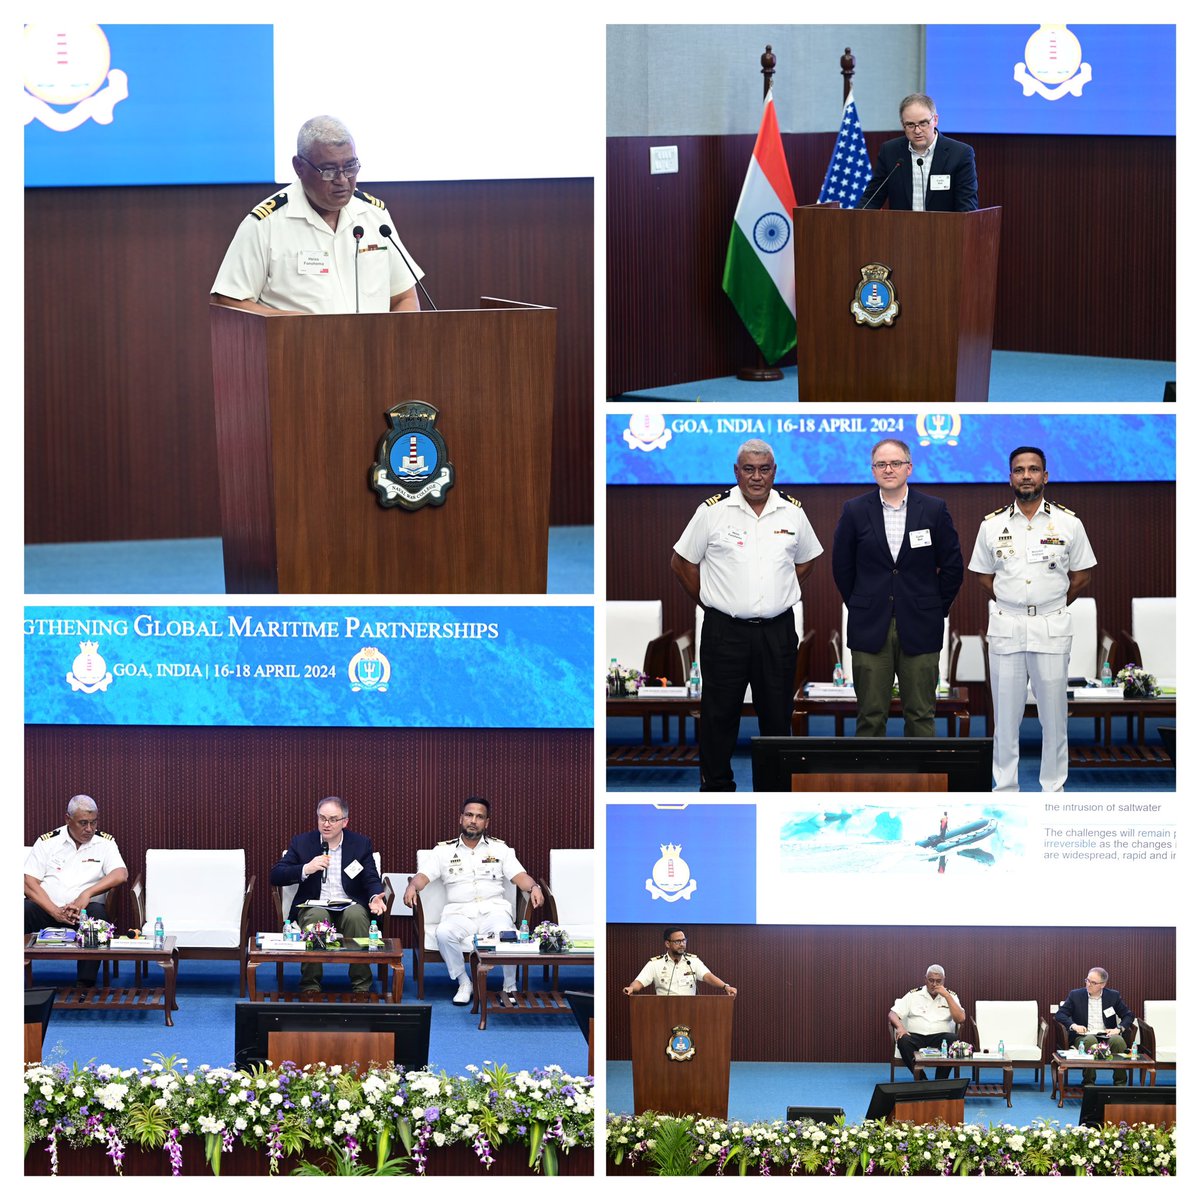 Indo-US Naval War College conference commenced at NWC, Goa. The theme was 'Strengthening global maritime partnerships' & issues discussed were:-

▶️Rules Based International Order
▶️Confidence Building Measures in Indo-Pacific Region 
▶️Impact of Climate Change in Maritime Domain